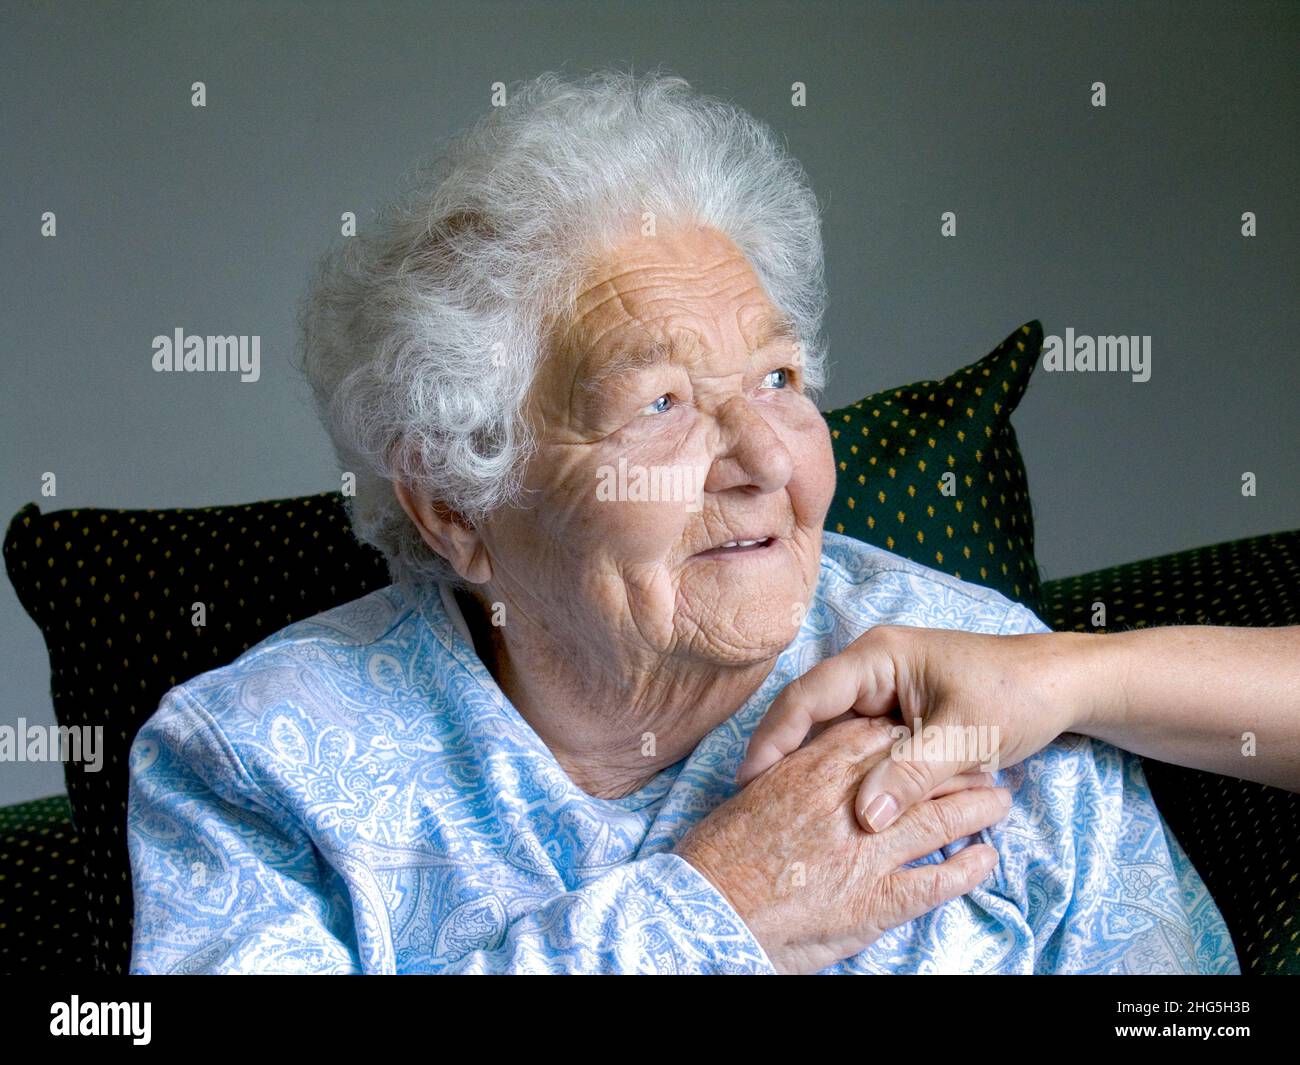 Elderly lady hands holding cared for in her old age, senior woman relaxed content secure woman holds comforting hand of carer nurse companion in her day living room in natural light Stock Photo